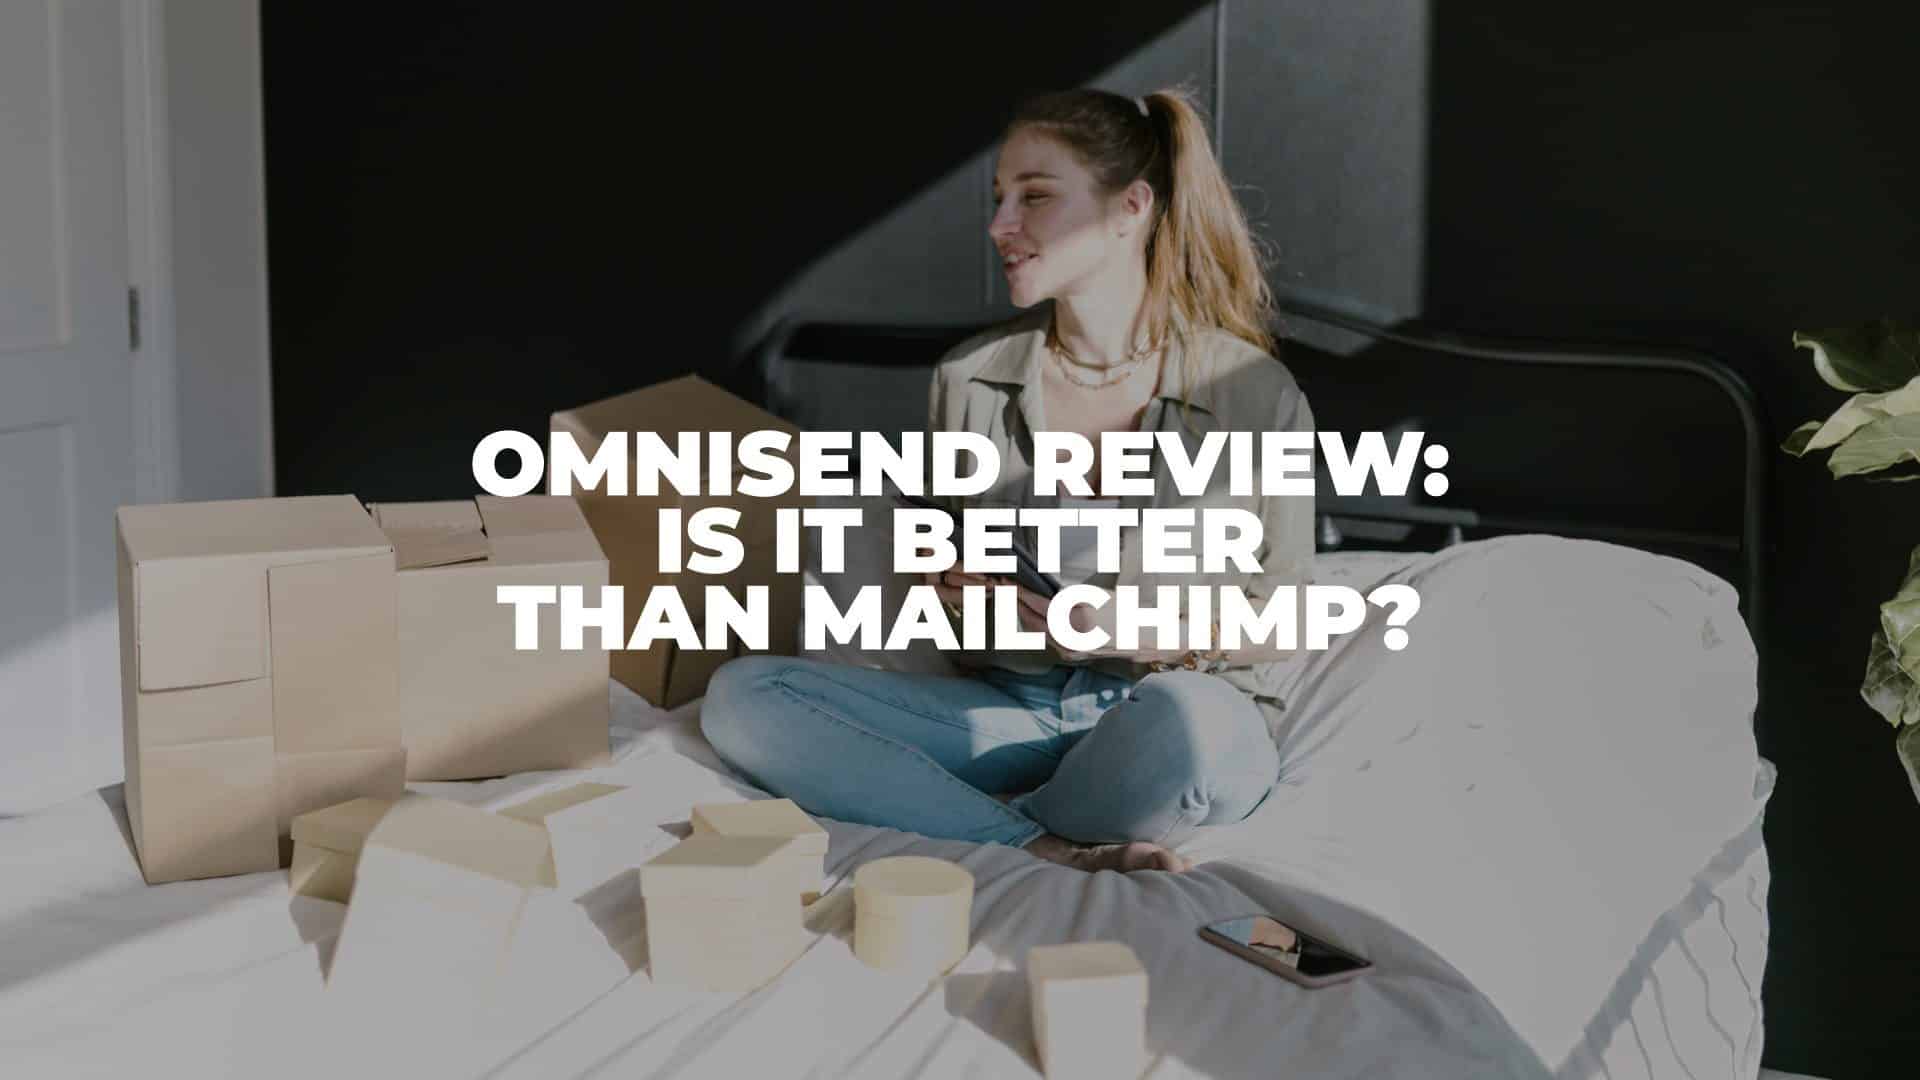 Omnisend Review - Featured Image